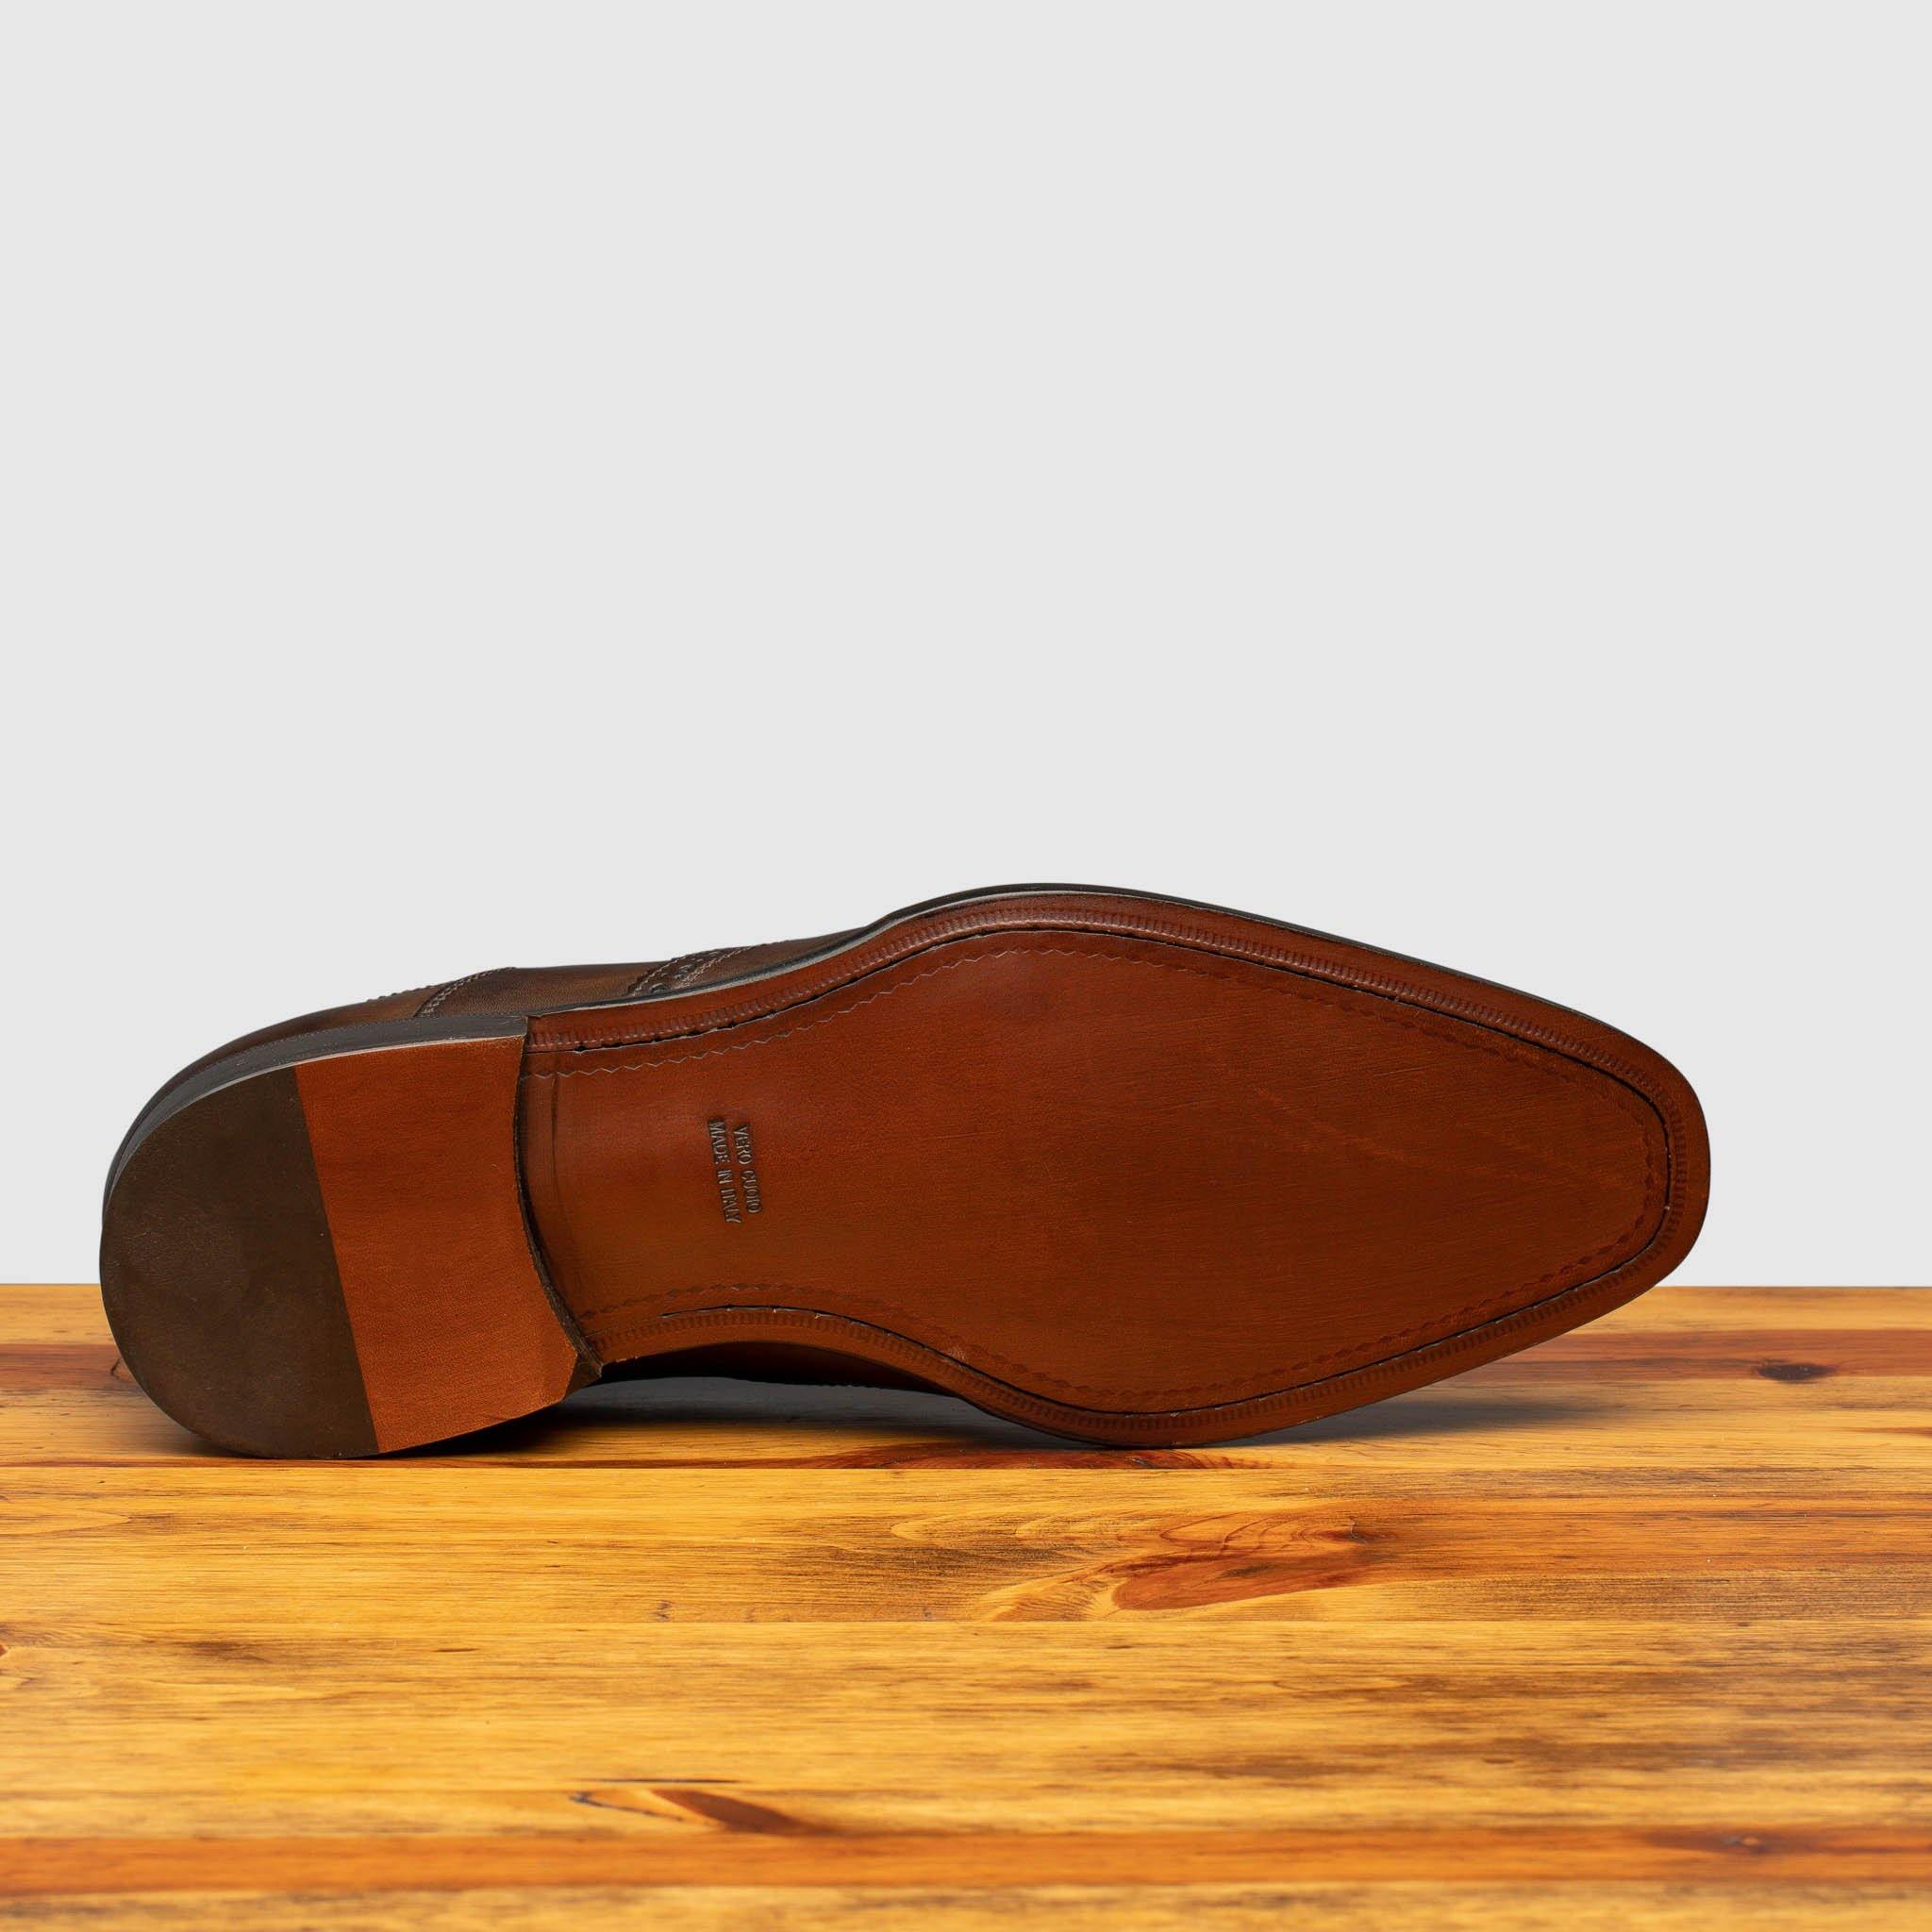 Full leather outsole of H310 Calzoleria Toscana Fondant Onice Wingtip Balmoral on top of a wooden table